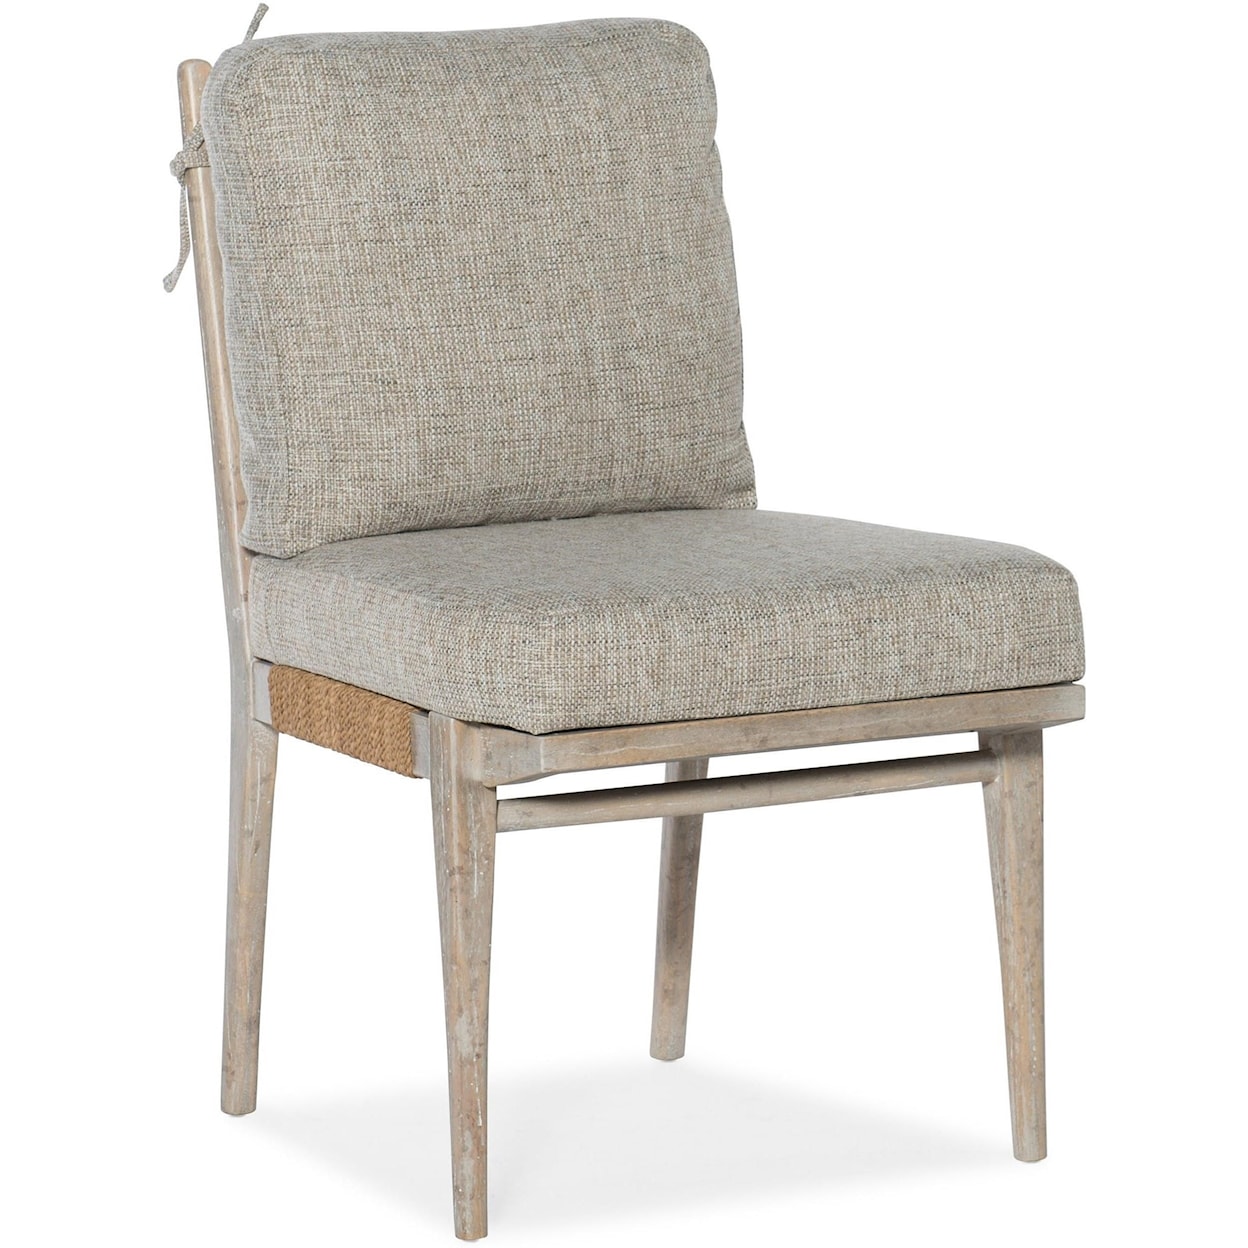 Hooker Furniture American Life Amani Upholstered Side Chair